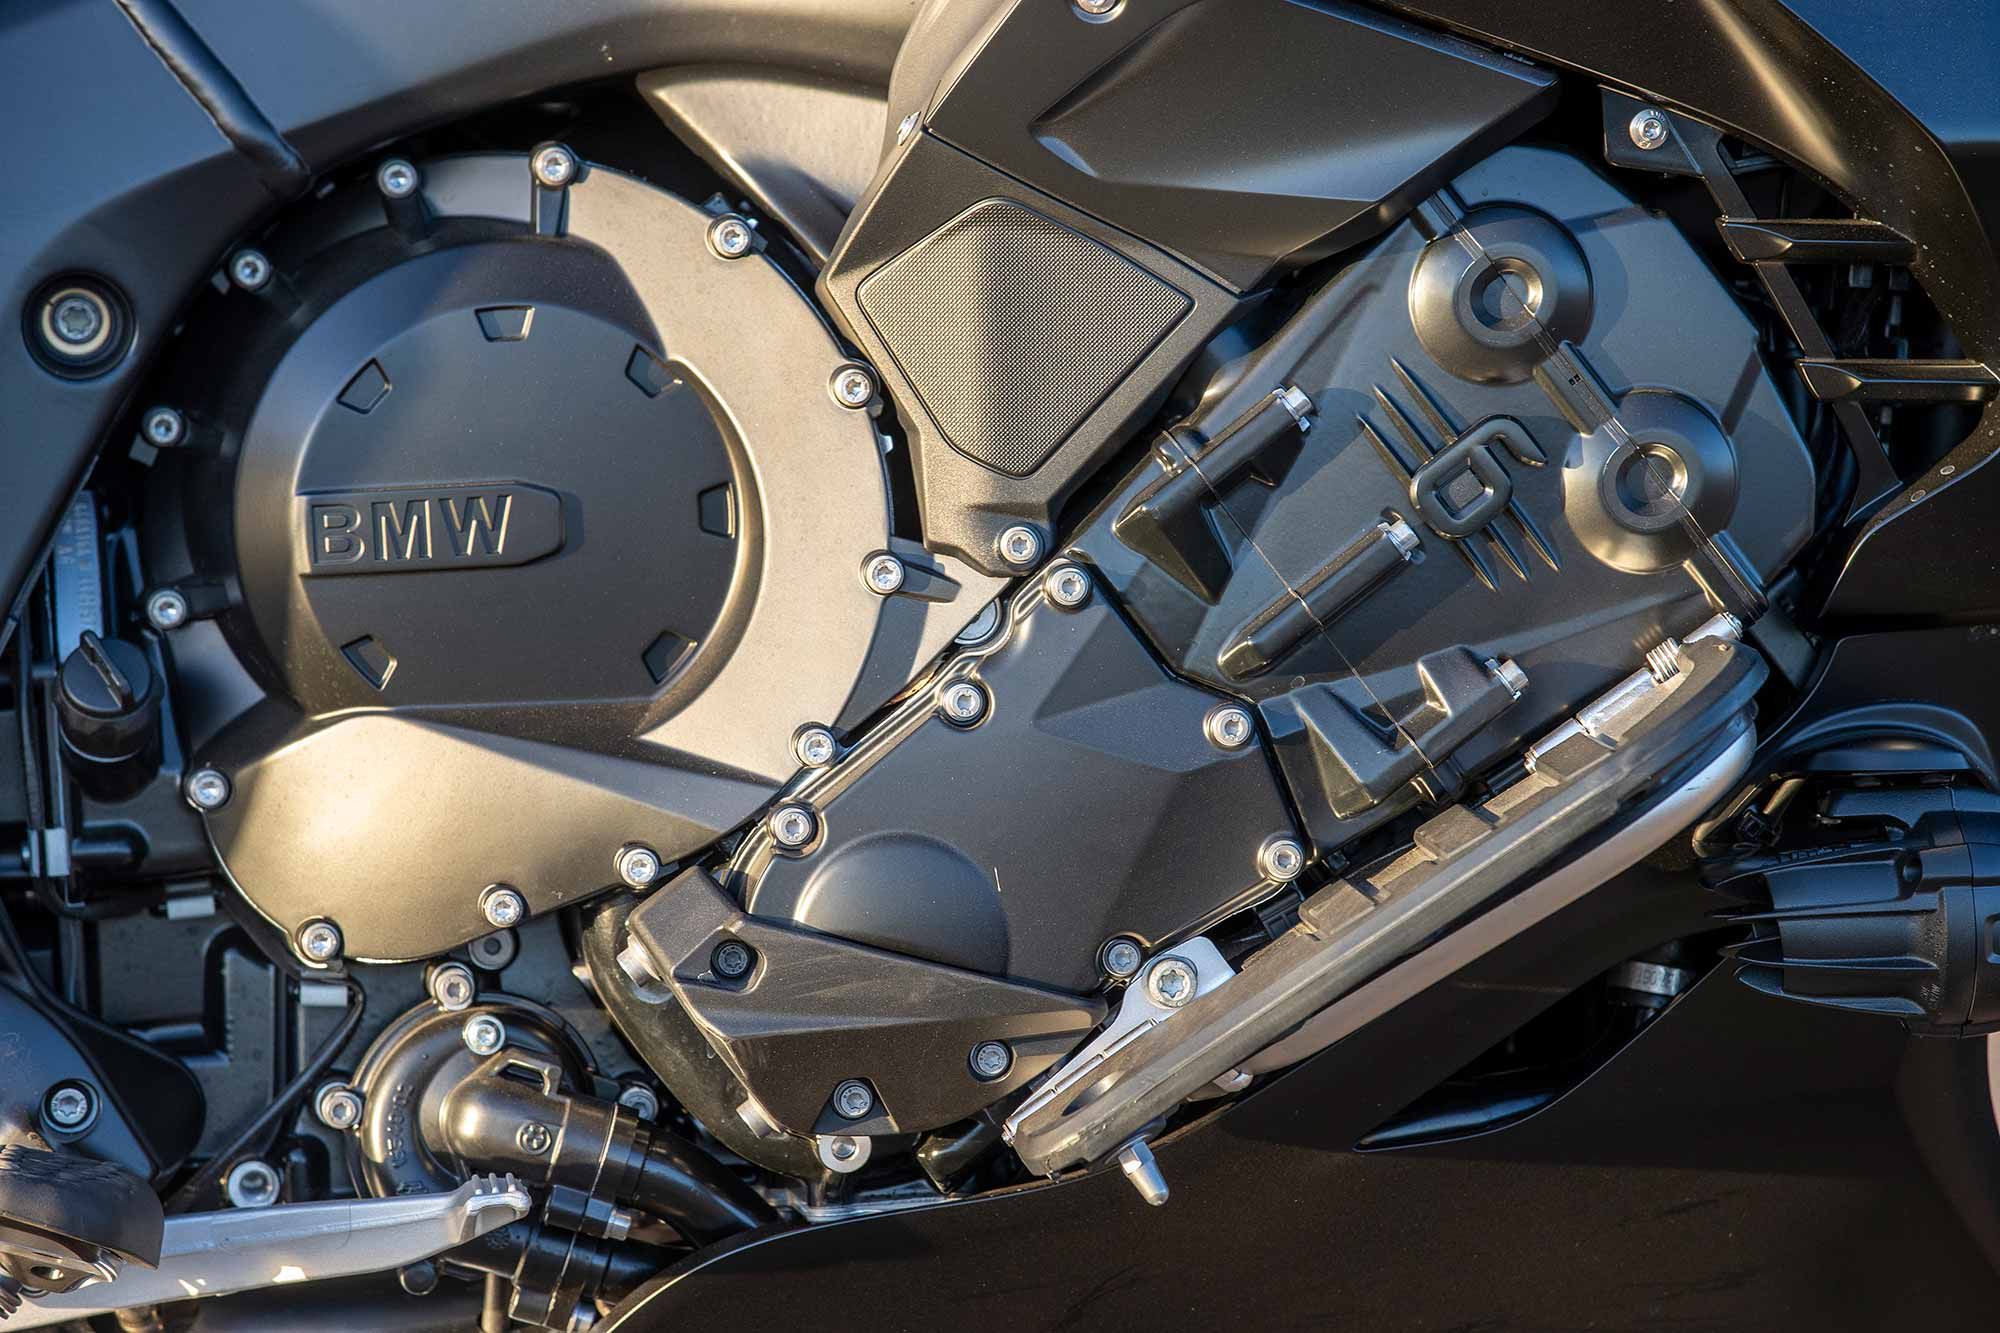 BMW’s inline-six is easily one of the finest engines in motorcycling. It happily purrs at lower rpm yet provides a wild rush of acceleration at high rpm.